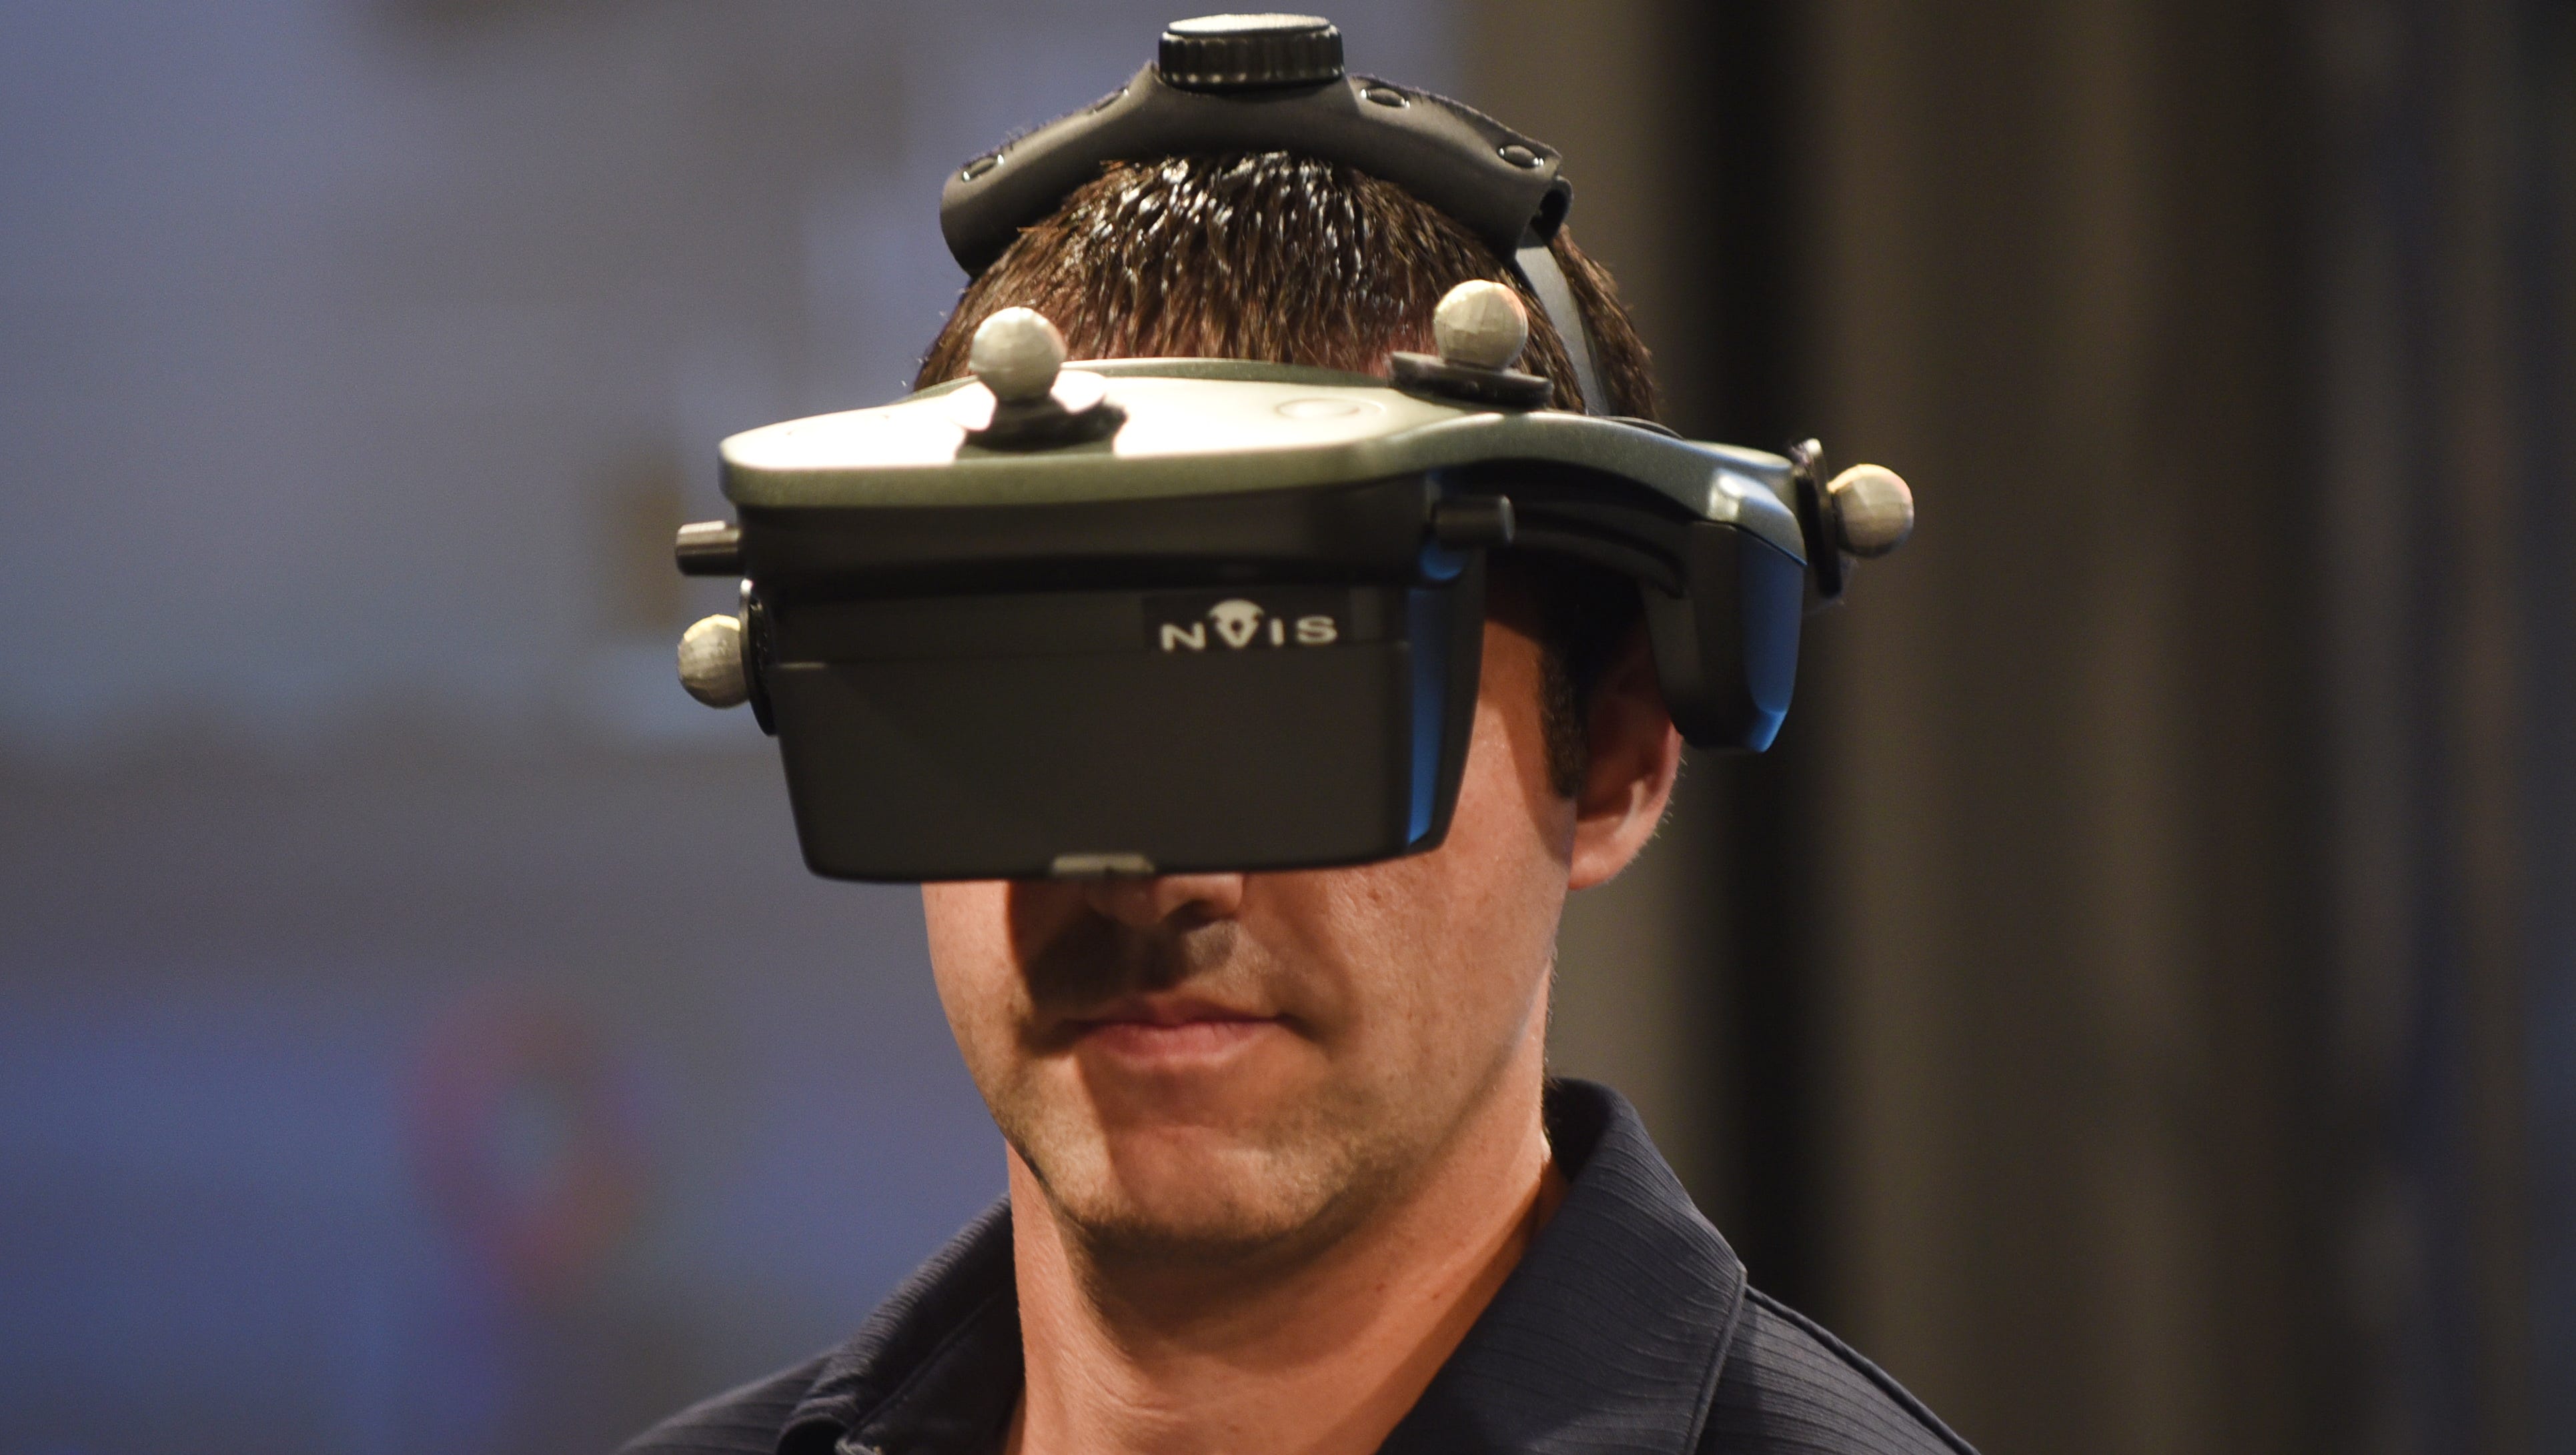 Ergonomist Rob McLean wears immersive virtual reality headgear as he demonstrates the marriage of a transmission to engine as part of Ford Motor Co.'s Virtual Manufacturing Technology.